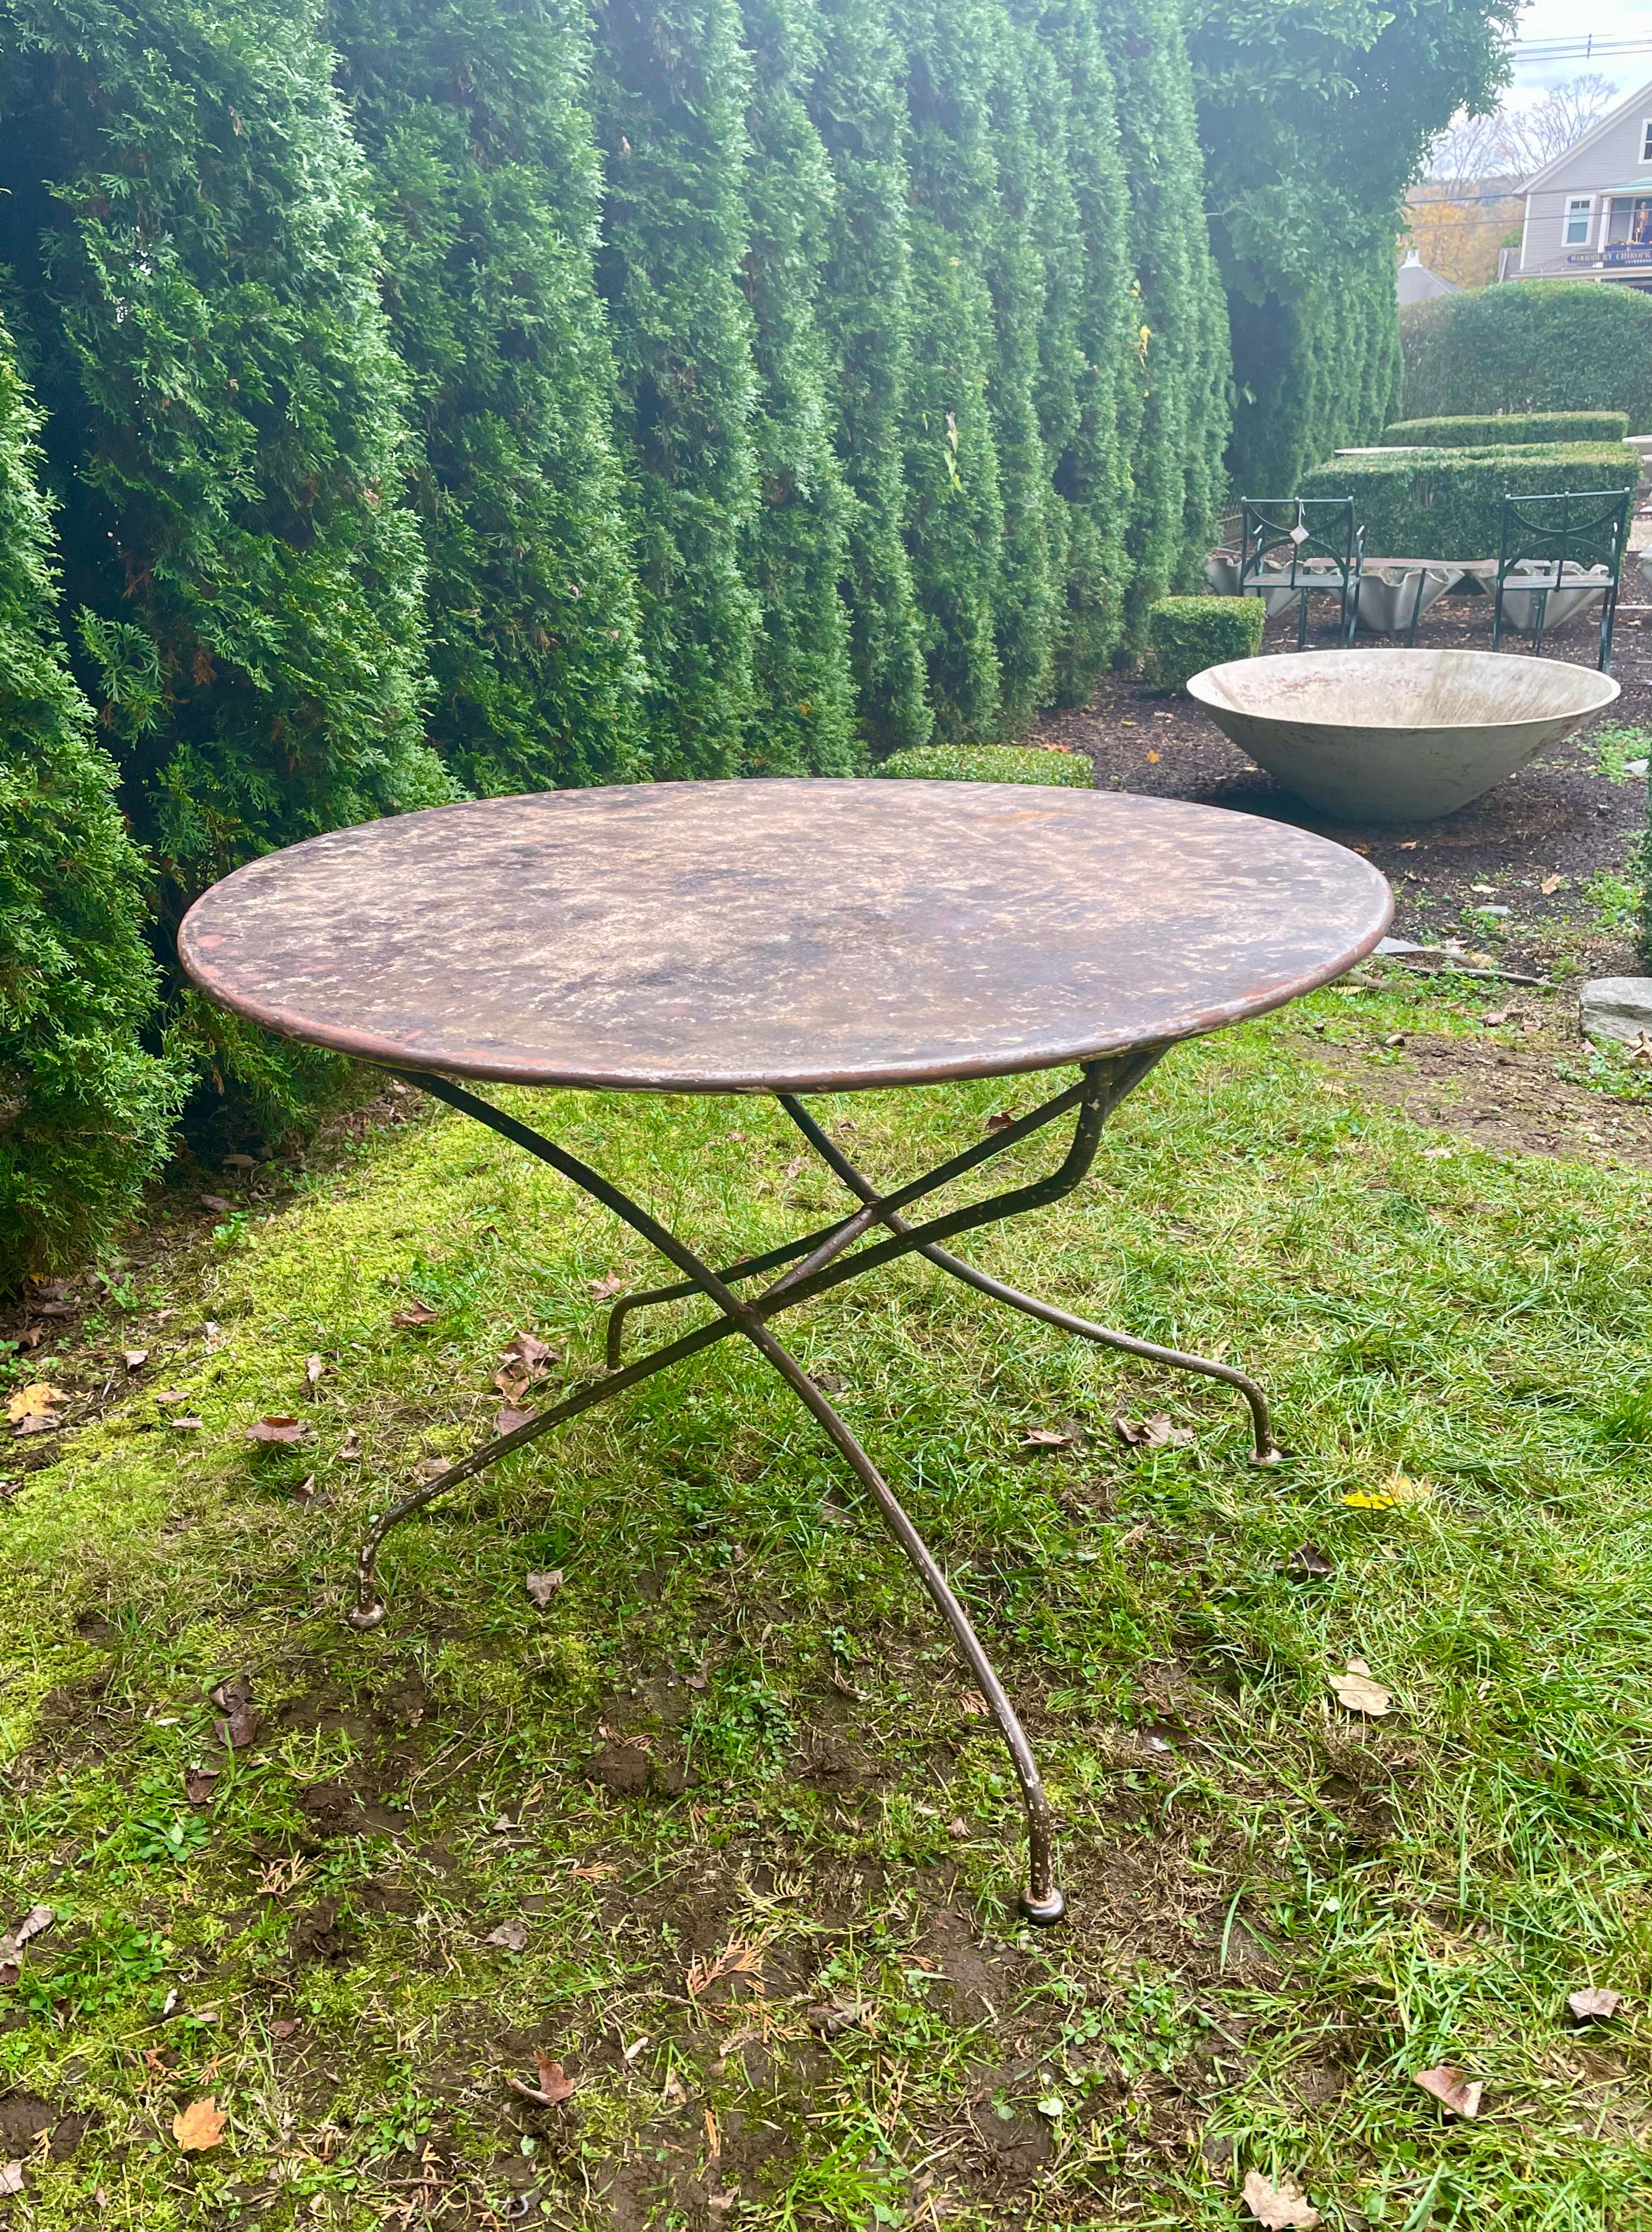 We love bistro tables, and this one is a special one with its mottled faux-painted top and folding base. Found in Provence, this beauty is in lovely antique condition and with its gently-curving legs, is a perfect addition inside or out. Weighing in